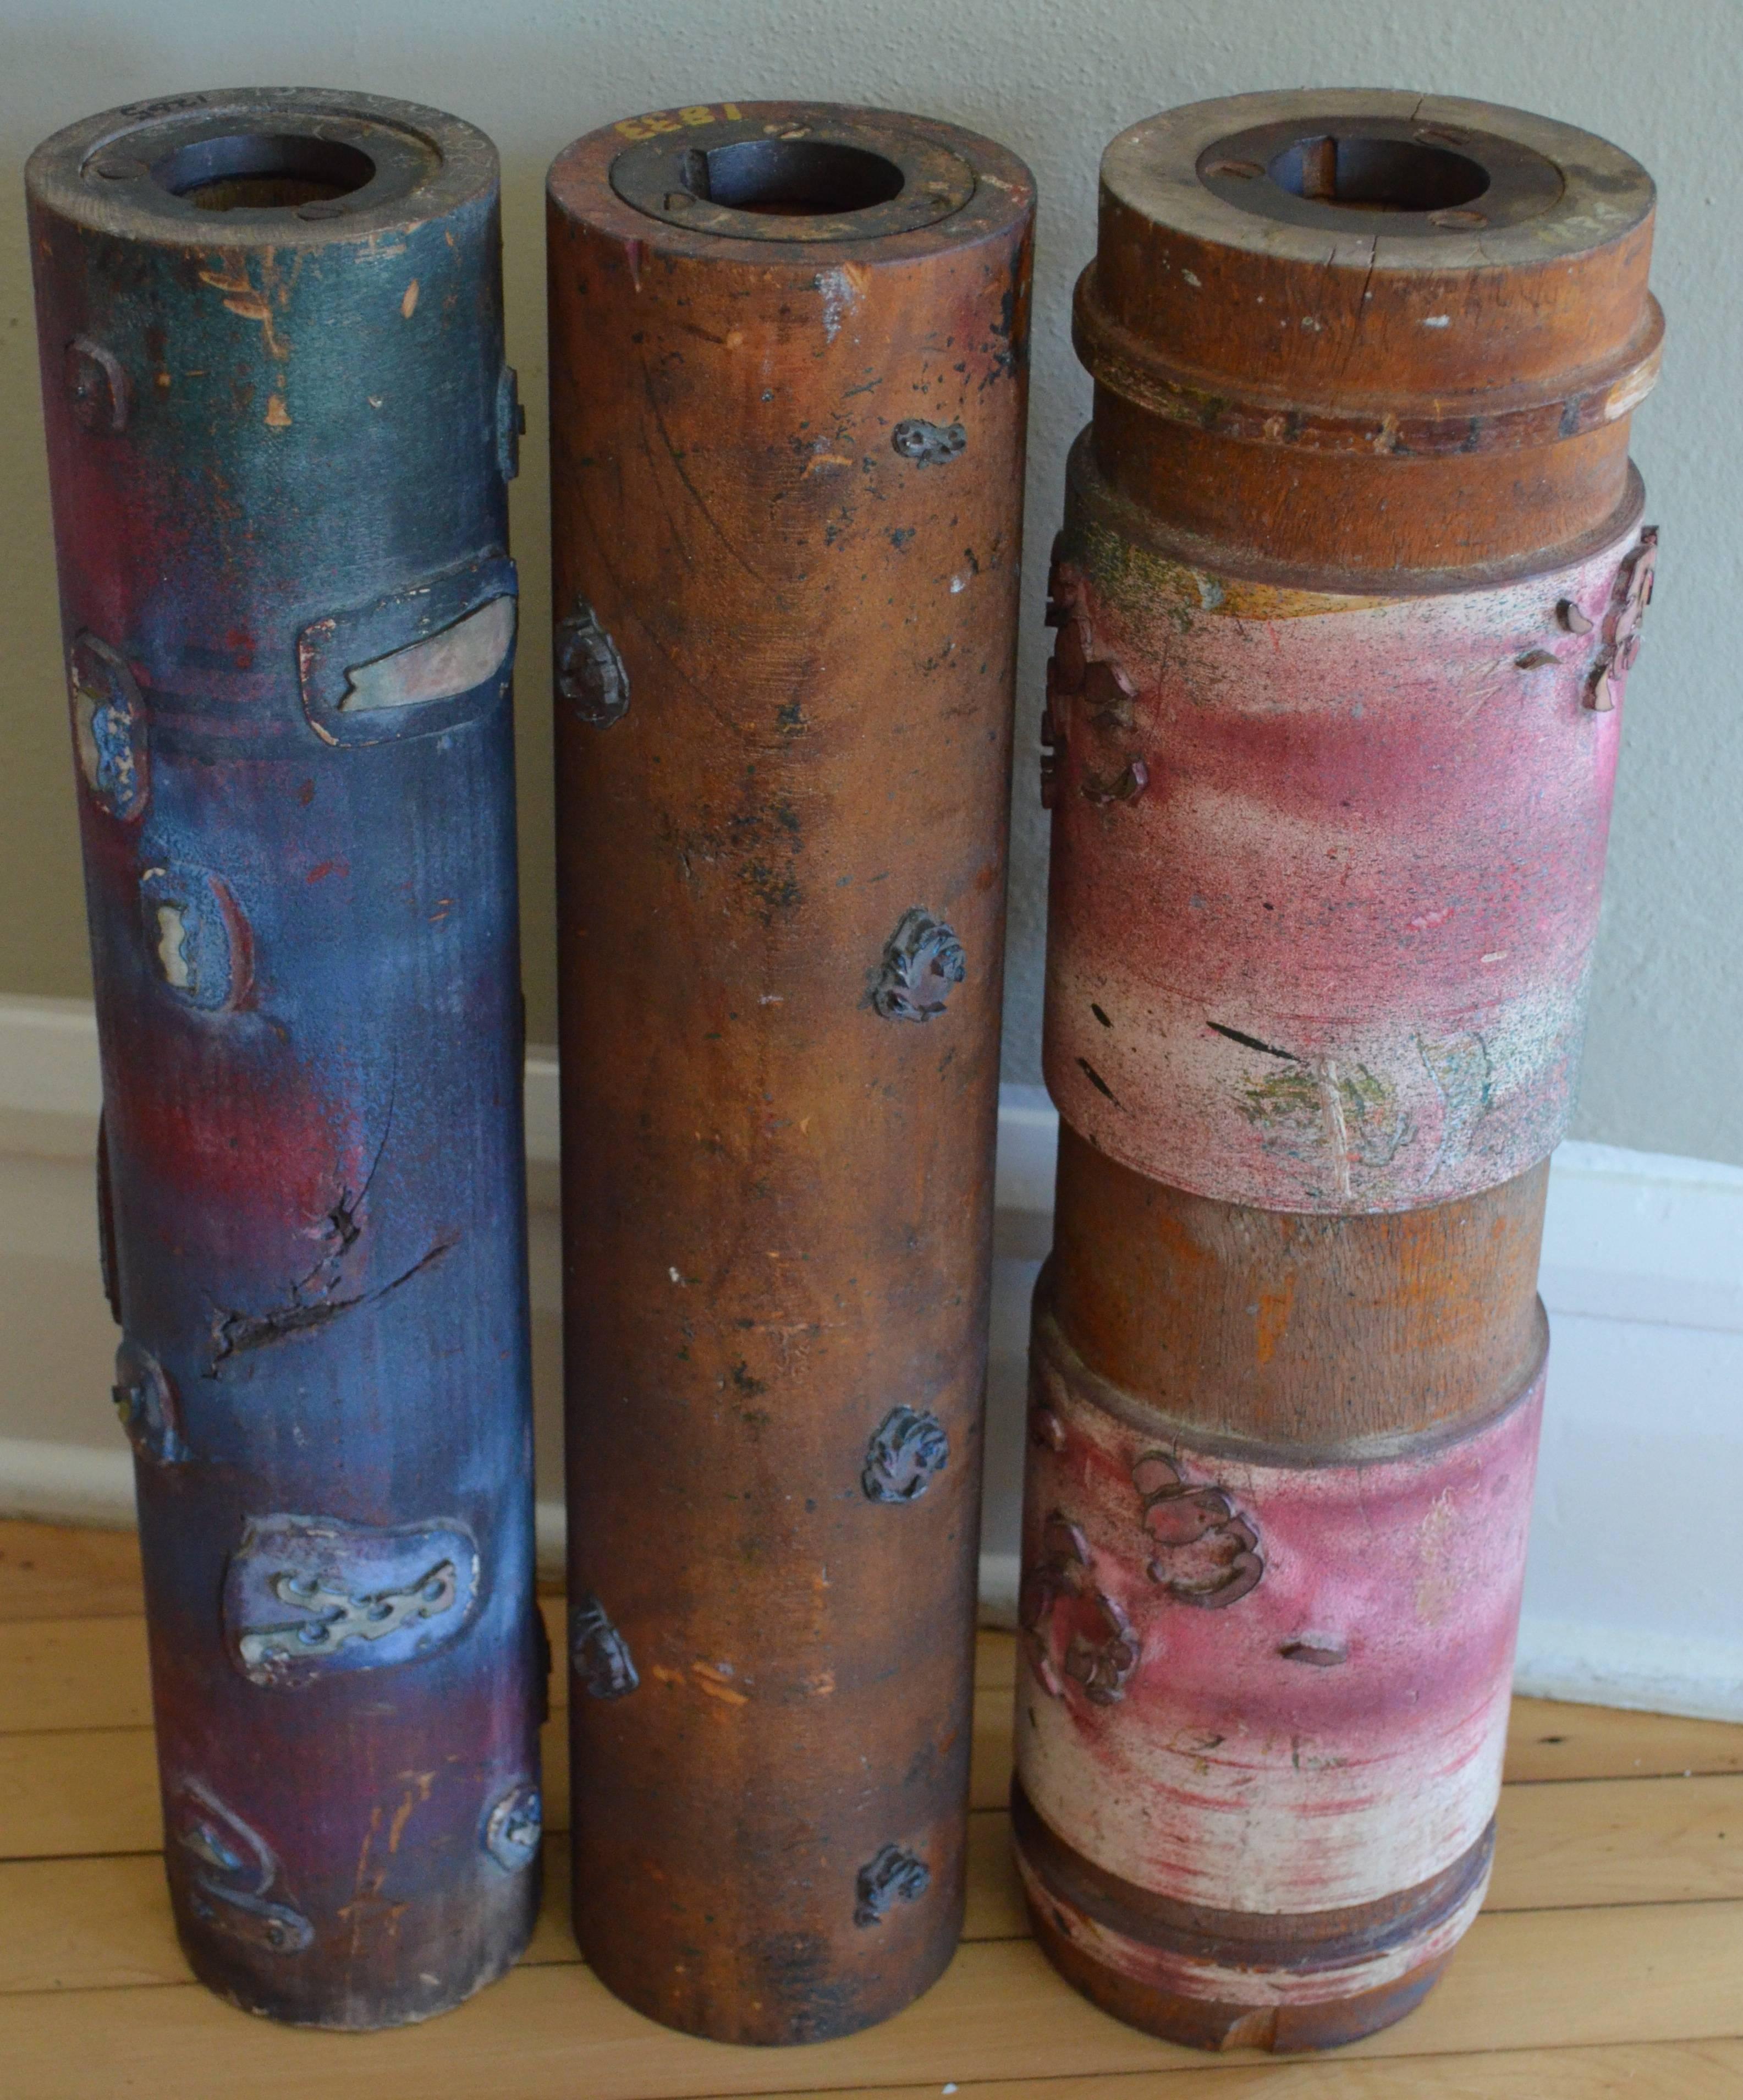 Printing rollers (set of three) fashioned from old growth mahogany or maple used to print wallpaper. Dating back to the early 1900s, these rollers were fitted out with brass filigrees hand-cut to the wallpaper pattern filled in with ink pads. The